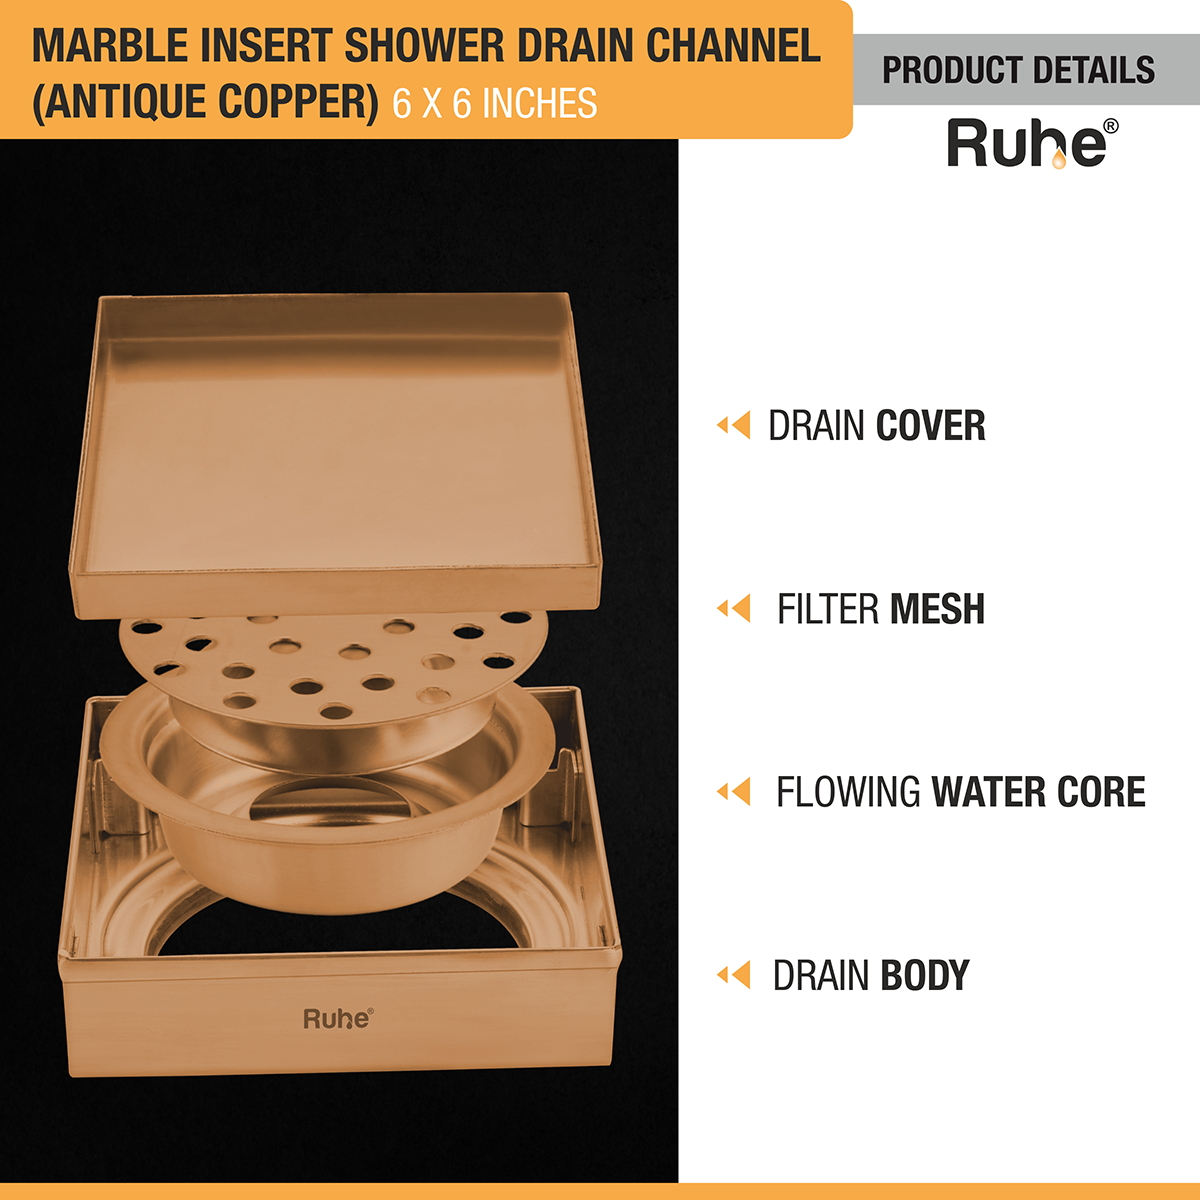 Marble Insert Shower Drain Channel (6 x 6 Inches) ROSE GOLD/ ANTIQUE COPPER product details